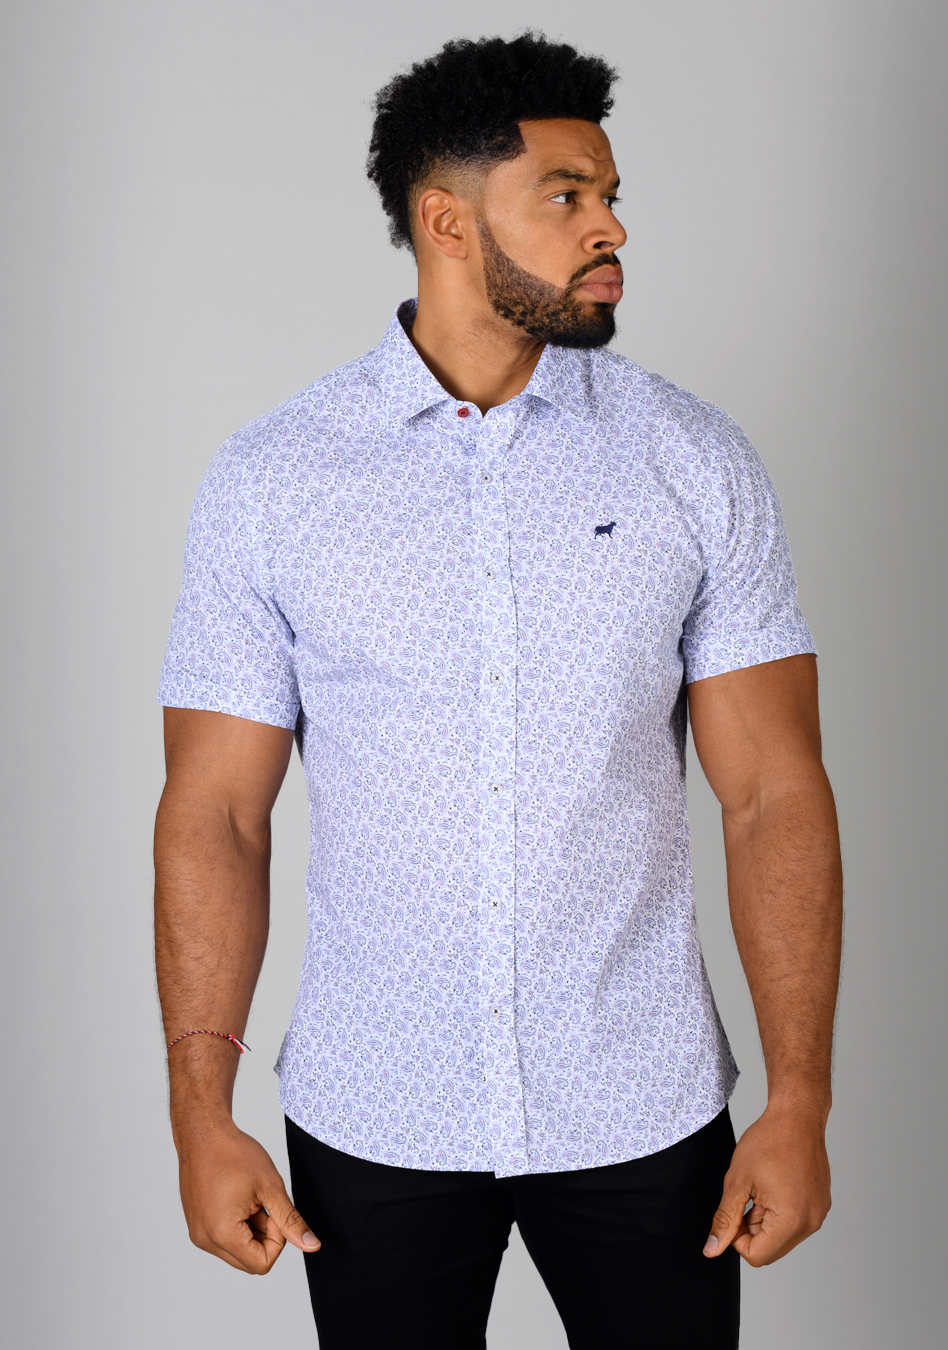 Floral short sleeve muscle fit shirt on an athletically built model, showcasing the athletic fit design that enhances physique, with stretch fabric for comfort and mobility